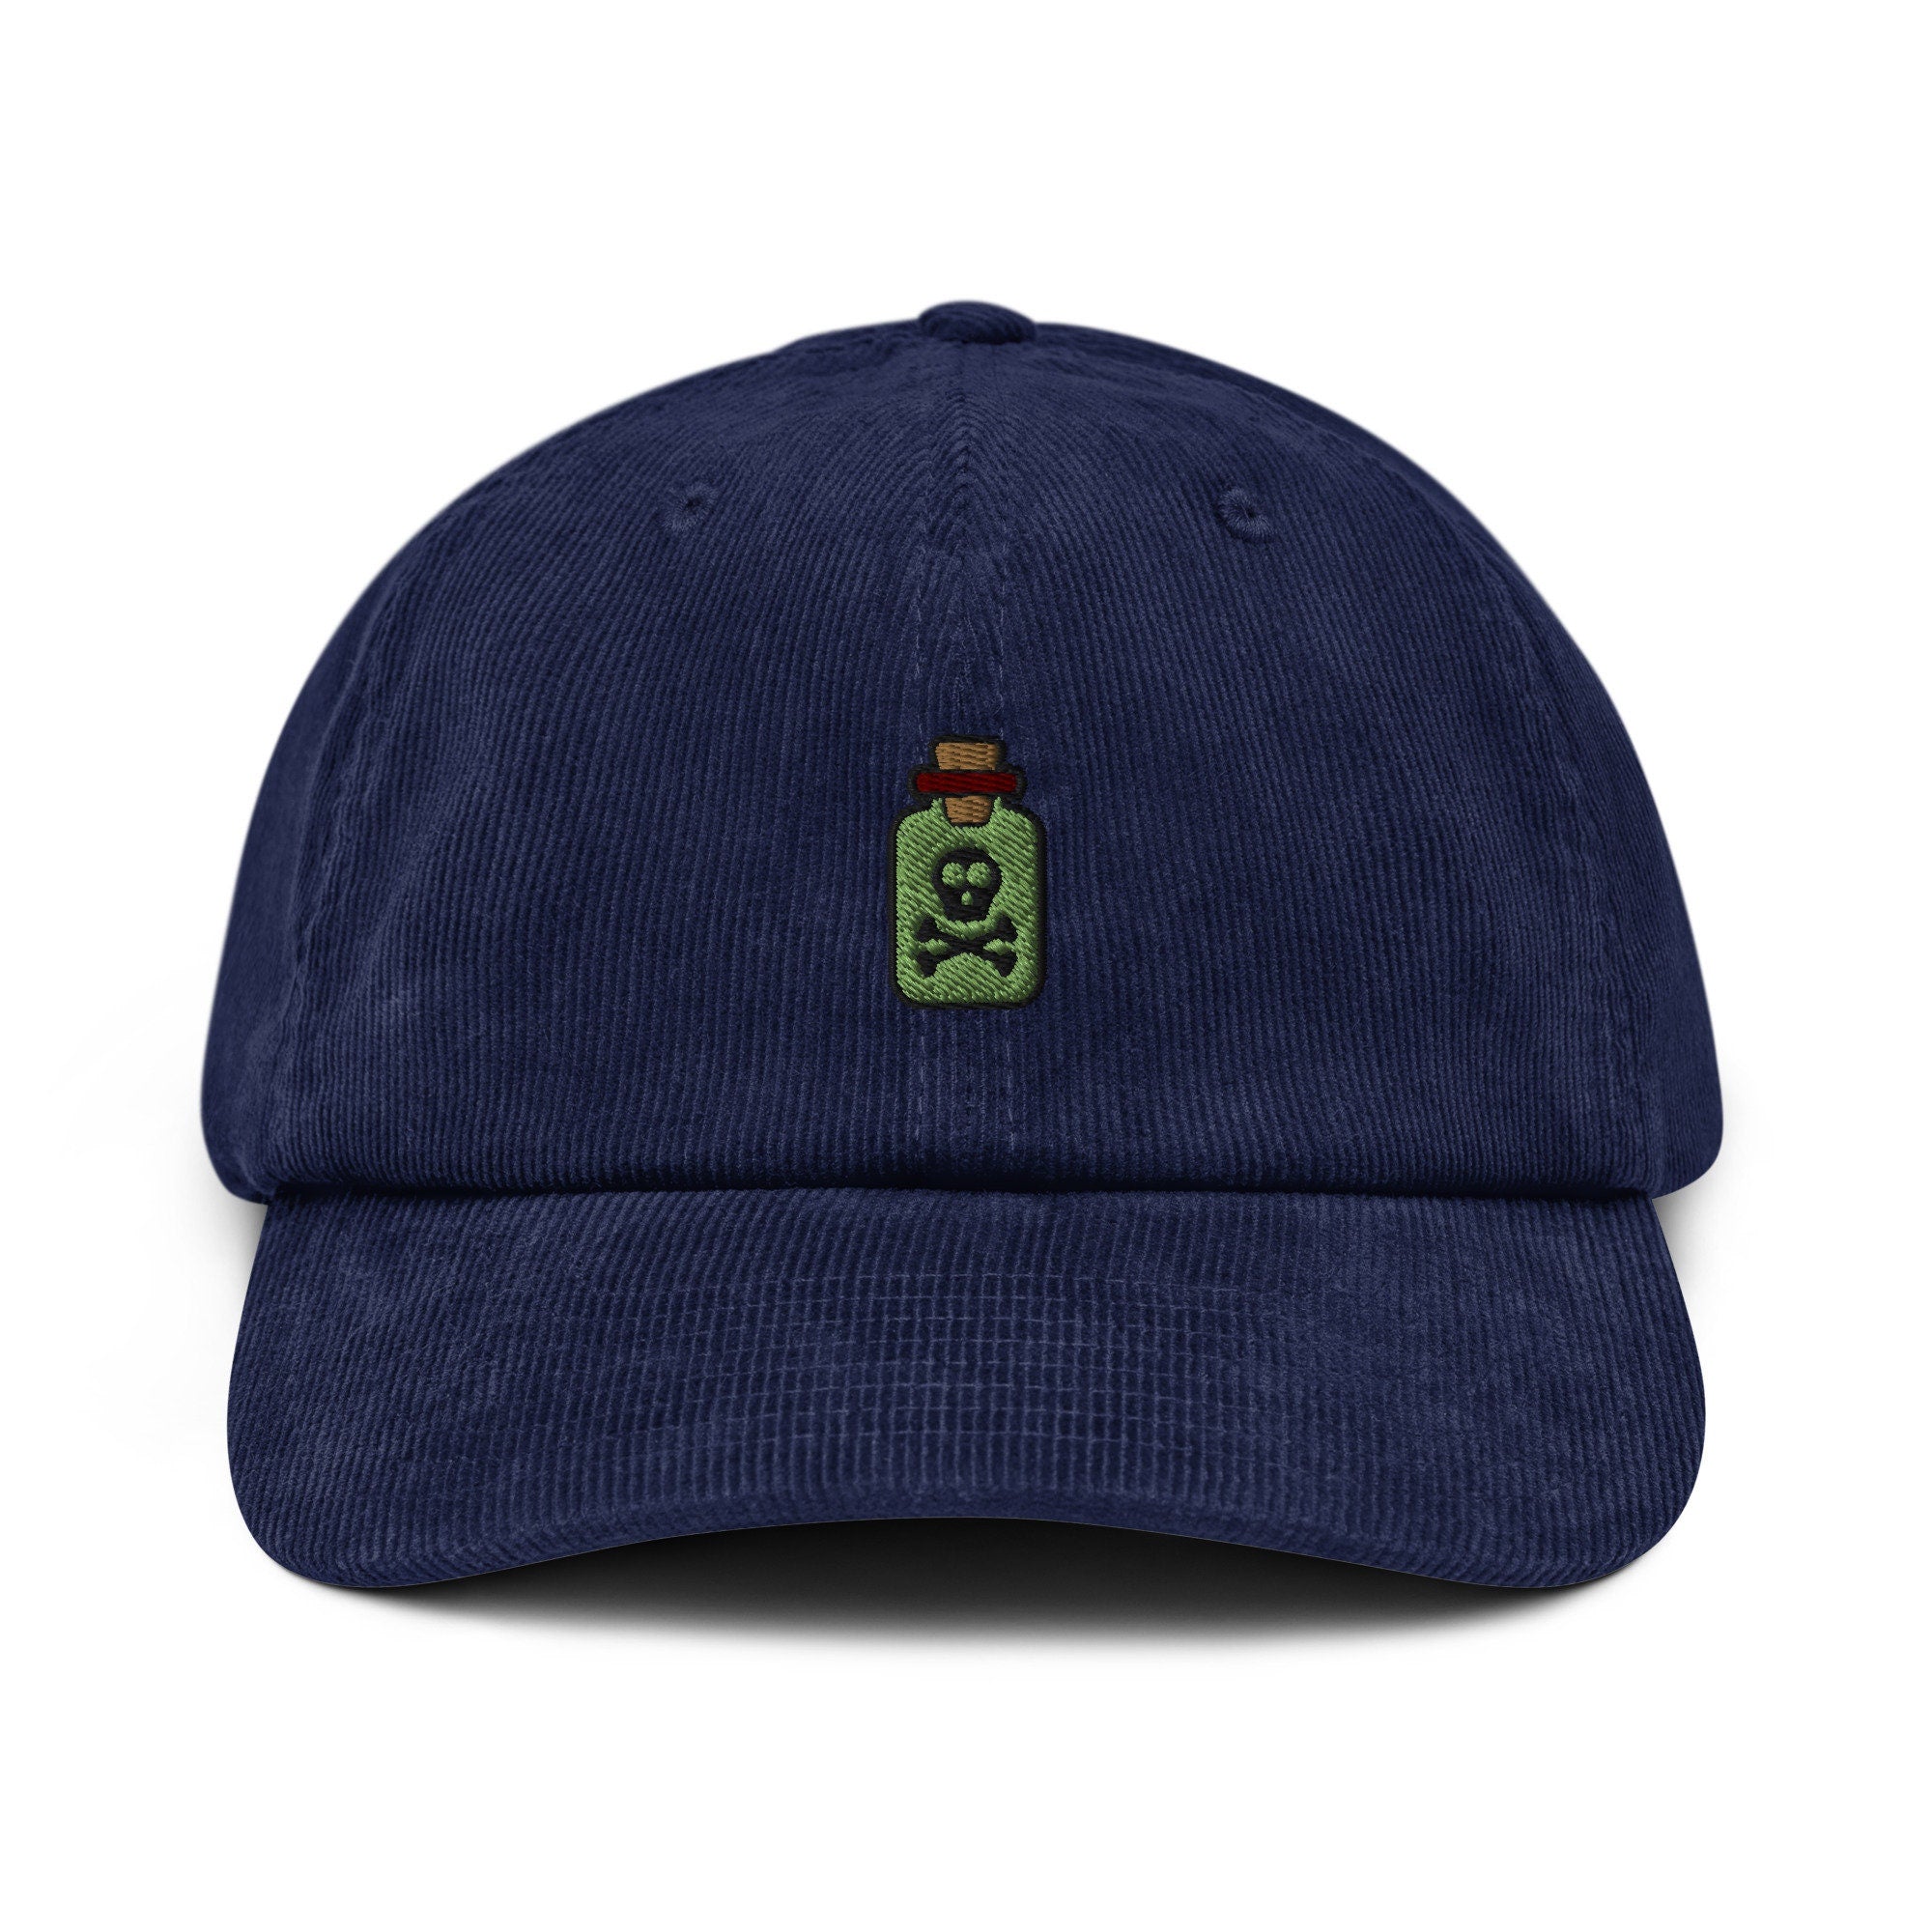 Poison Corduroy Hat, Handmade Embroidered Corduroy Dad Cap - Multiple Colors